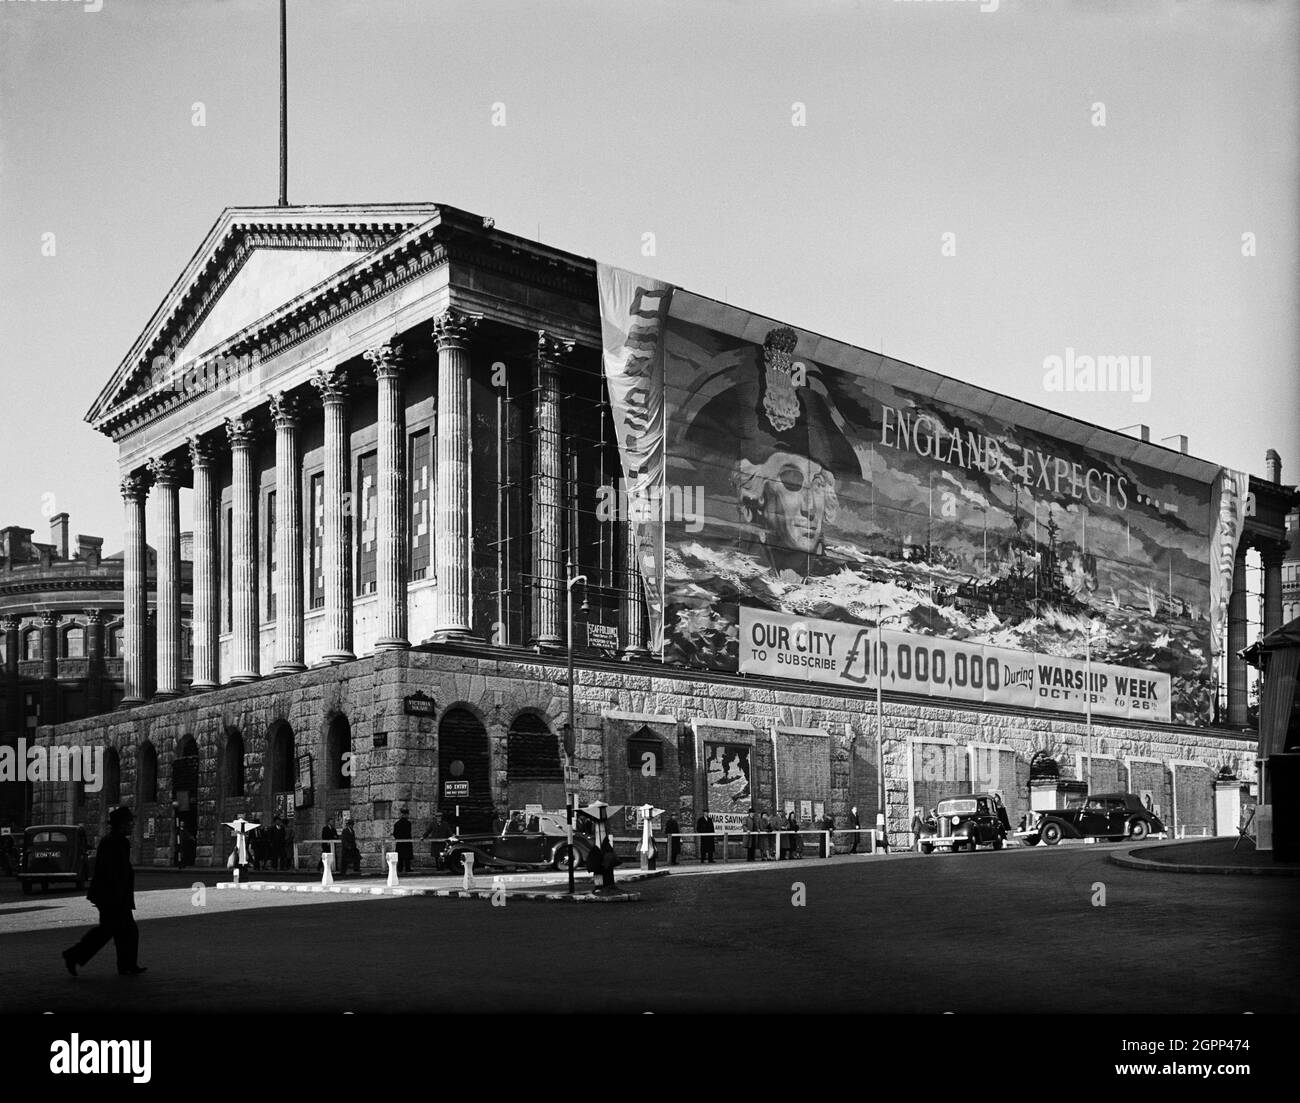 Town Hall, Victoria Square, Birmingham, 1941. A view showing Birmingham Town Hall, draped with a large banner encouraging people to donate to Warship Week, during which the city hoped to raise &#xa3;10,000,000 to sponsor HMS King George V. Stock Photo